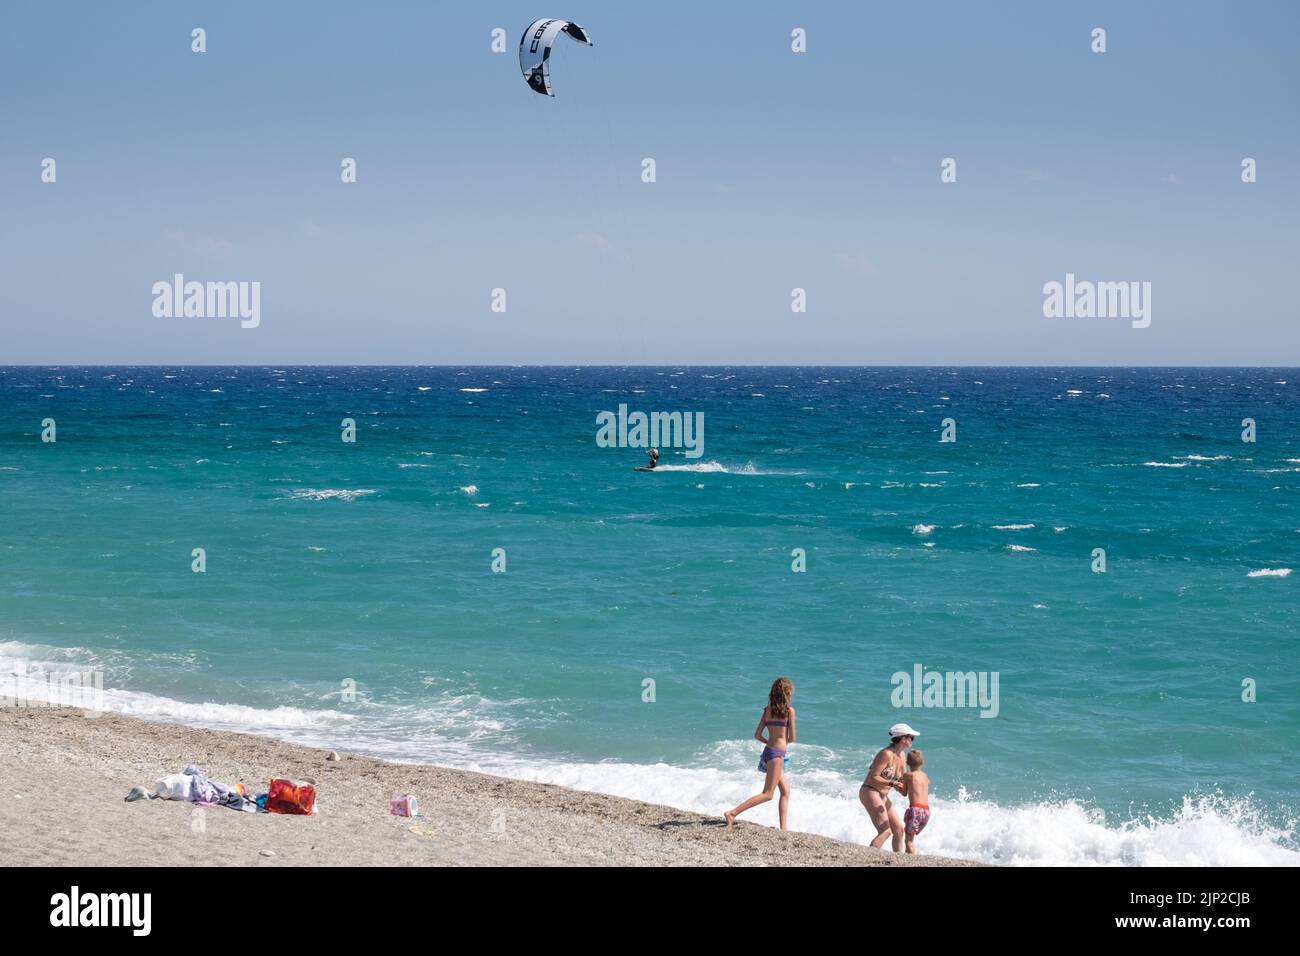 Man kitesfring with people and a family playing in  the shore of Agiokampos beach,Greece Stock Photo